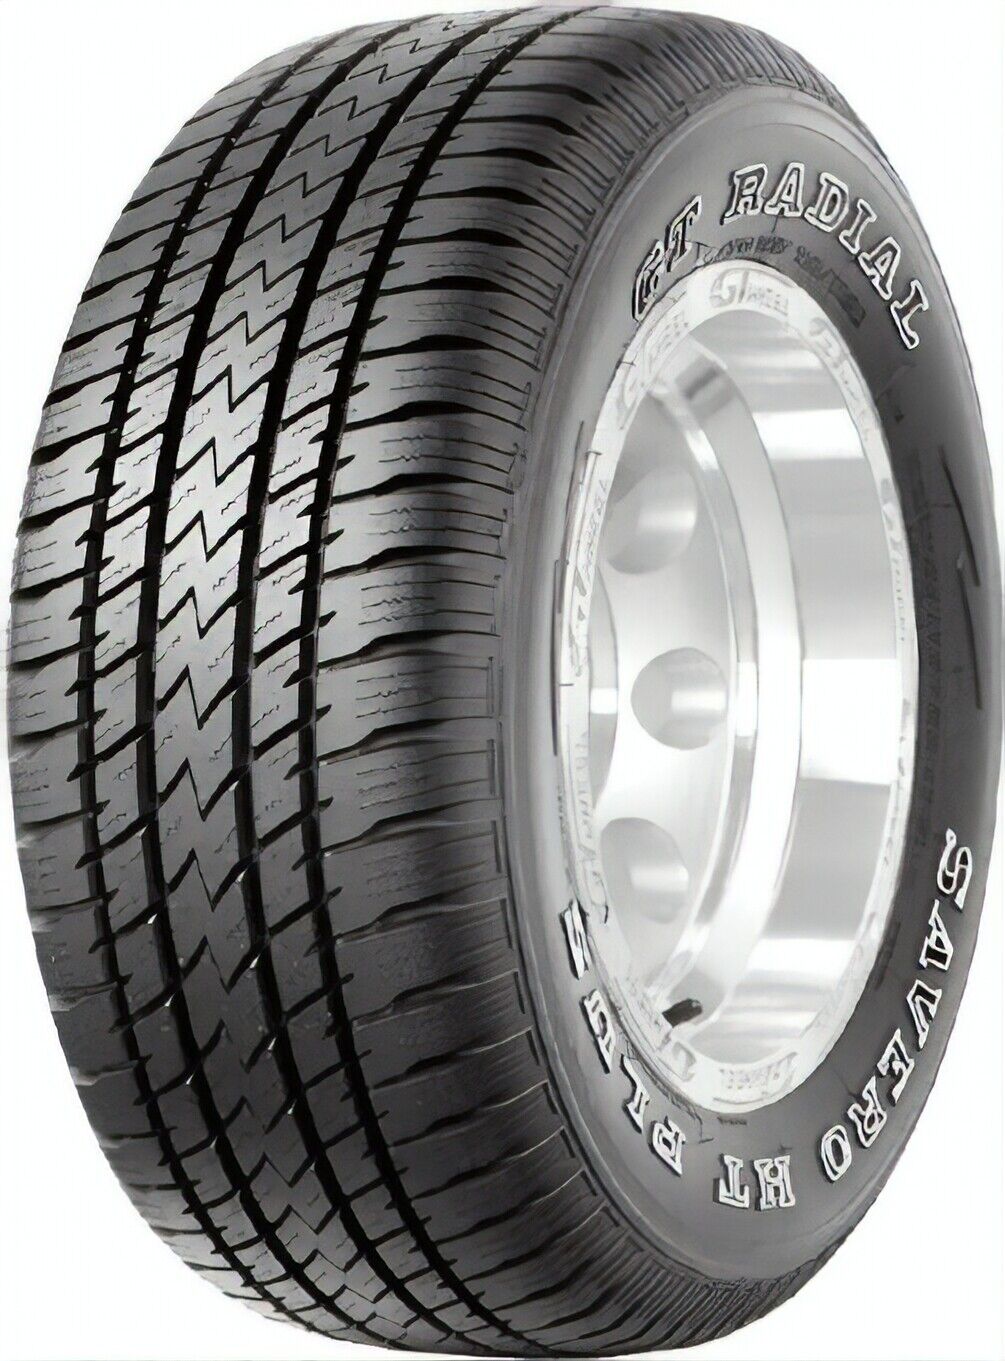 GT Radial Savero HT-S 245/60R18 105H BSW (1 Tires)